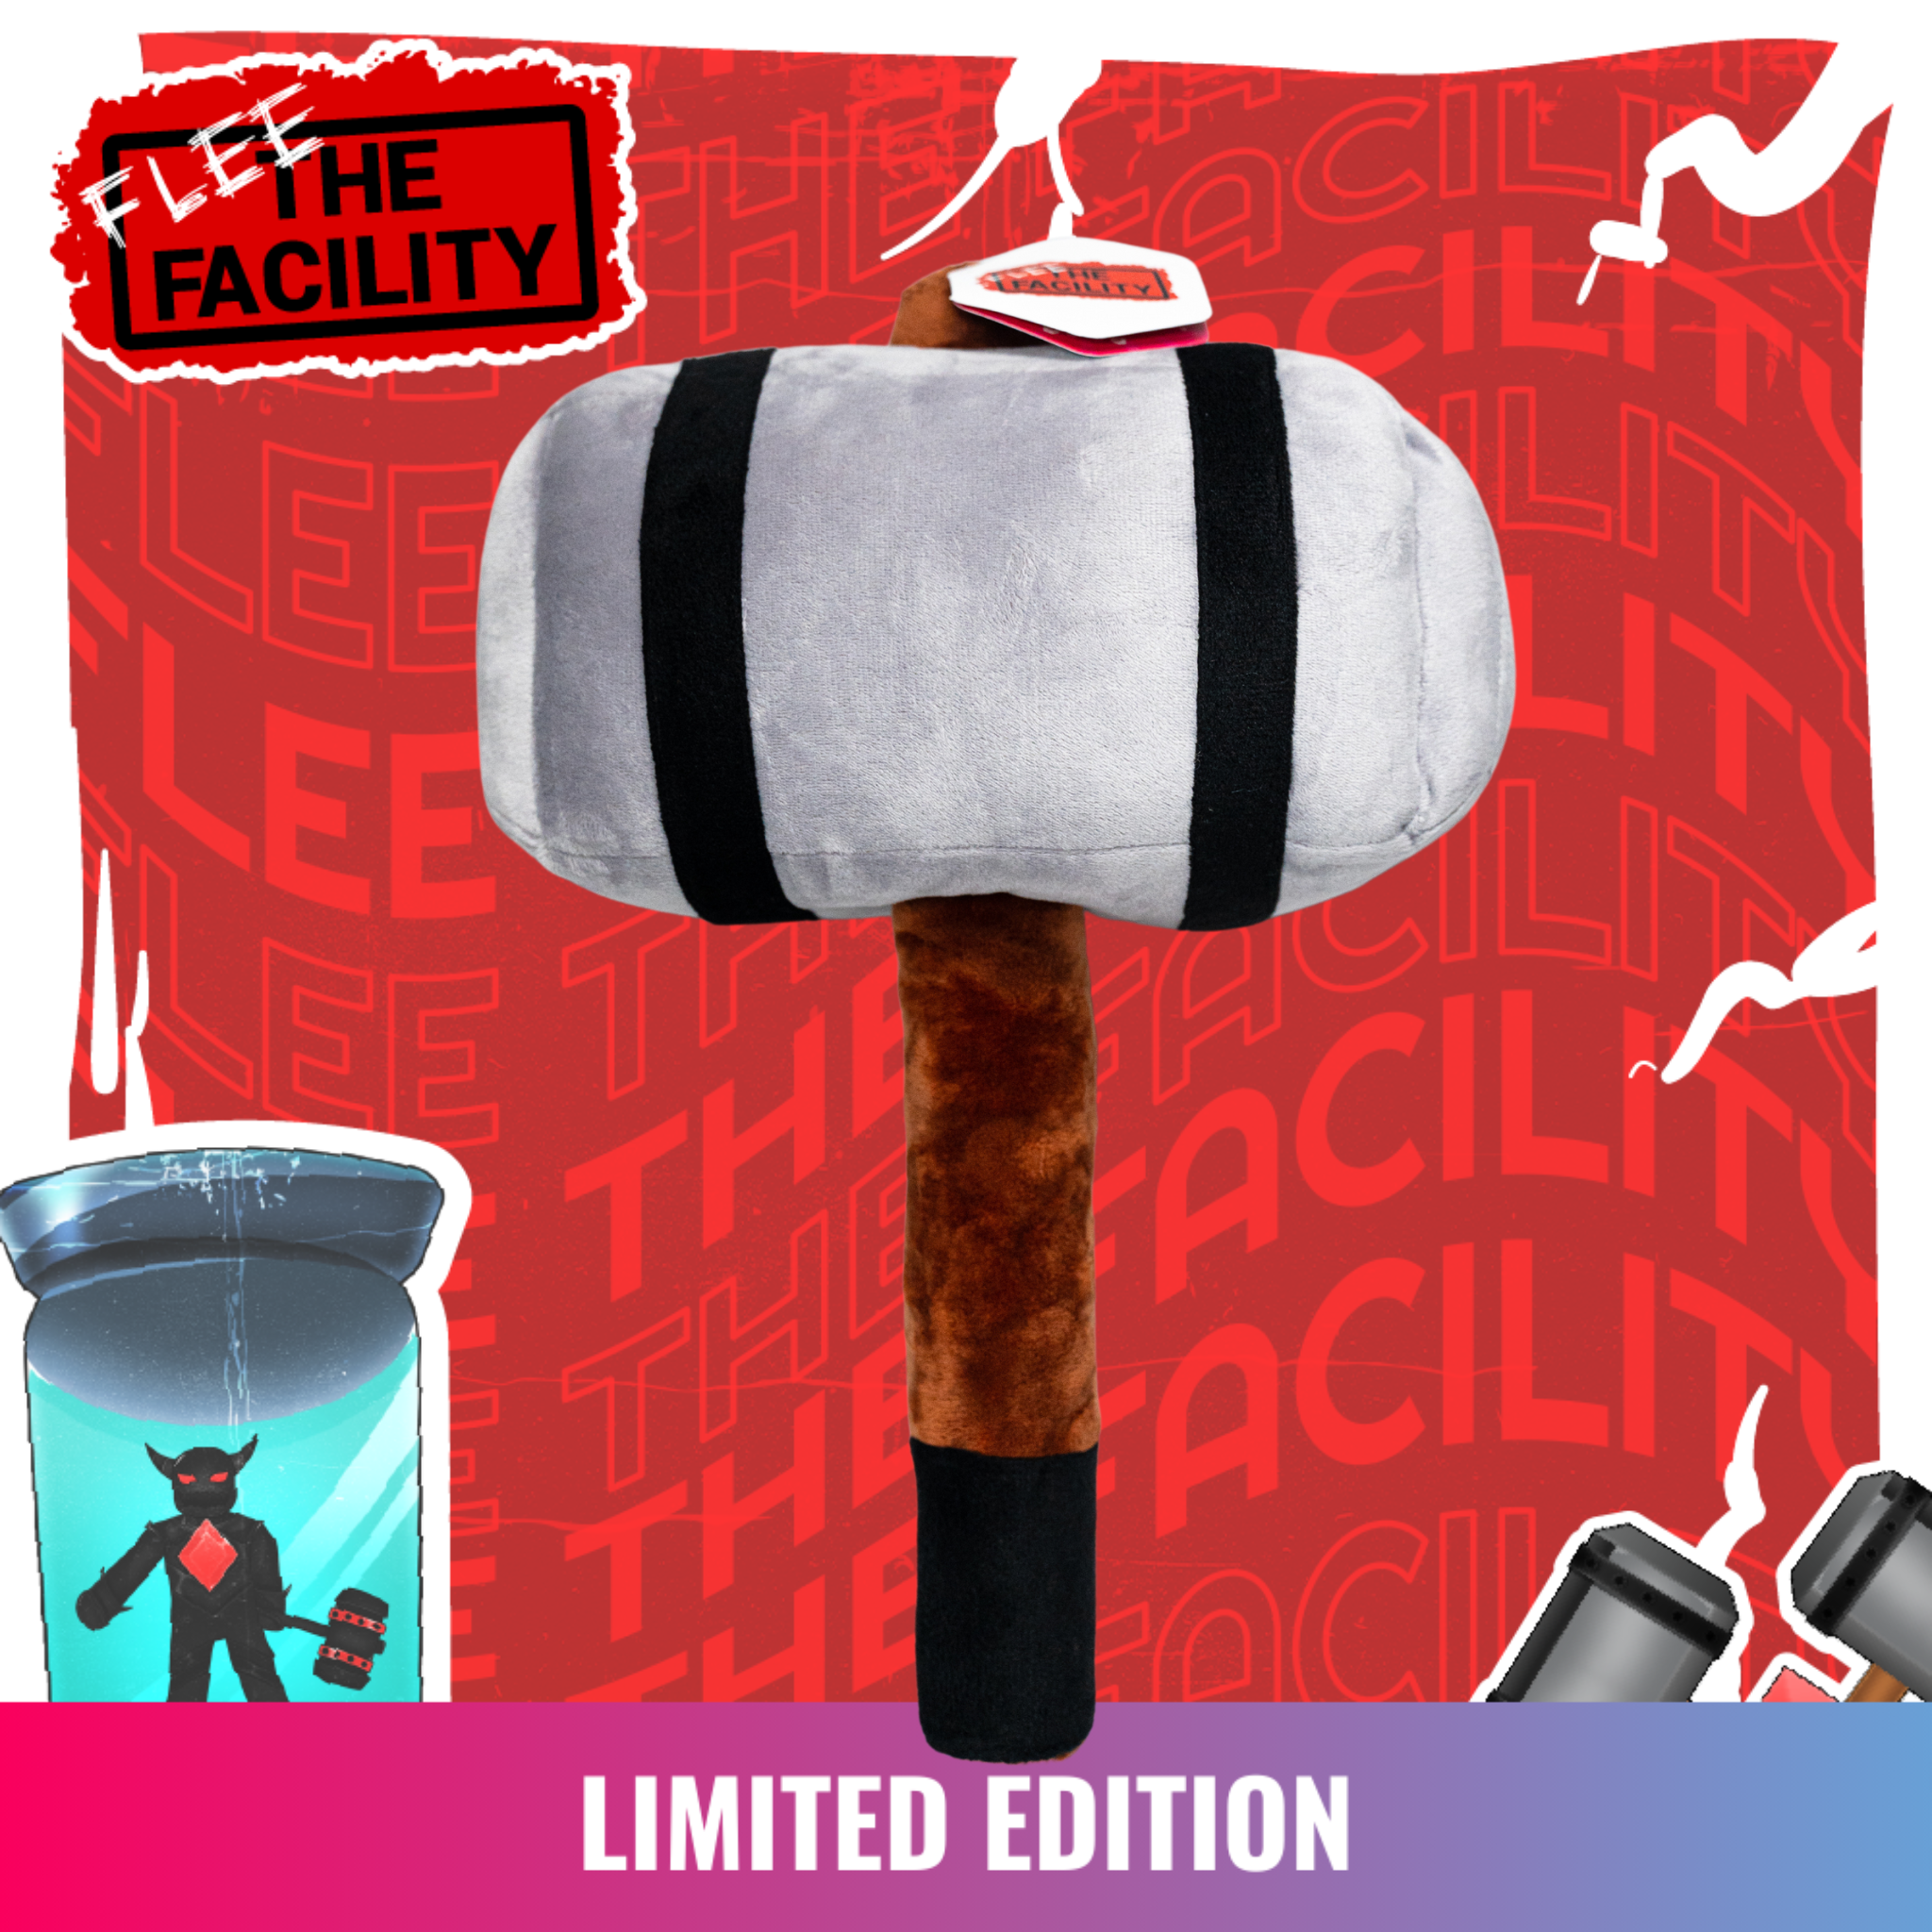 [LIMITED] Flee The Facility - Default Gray Hammer Plush Toy 1st Edition